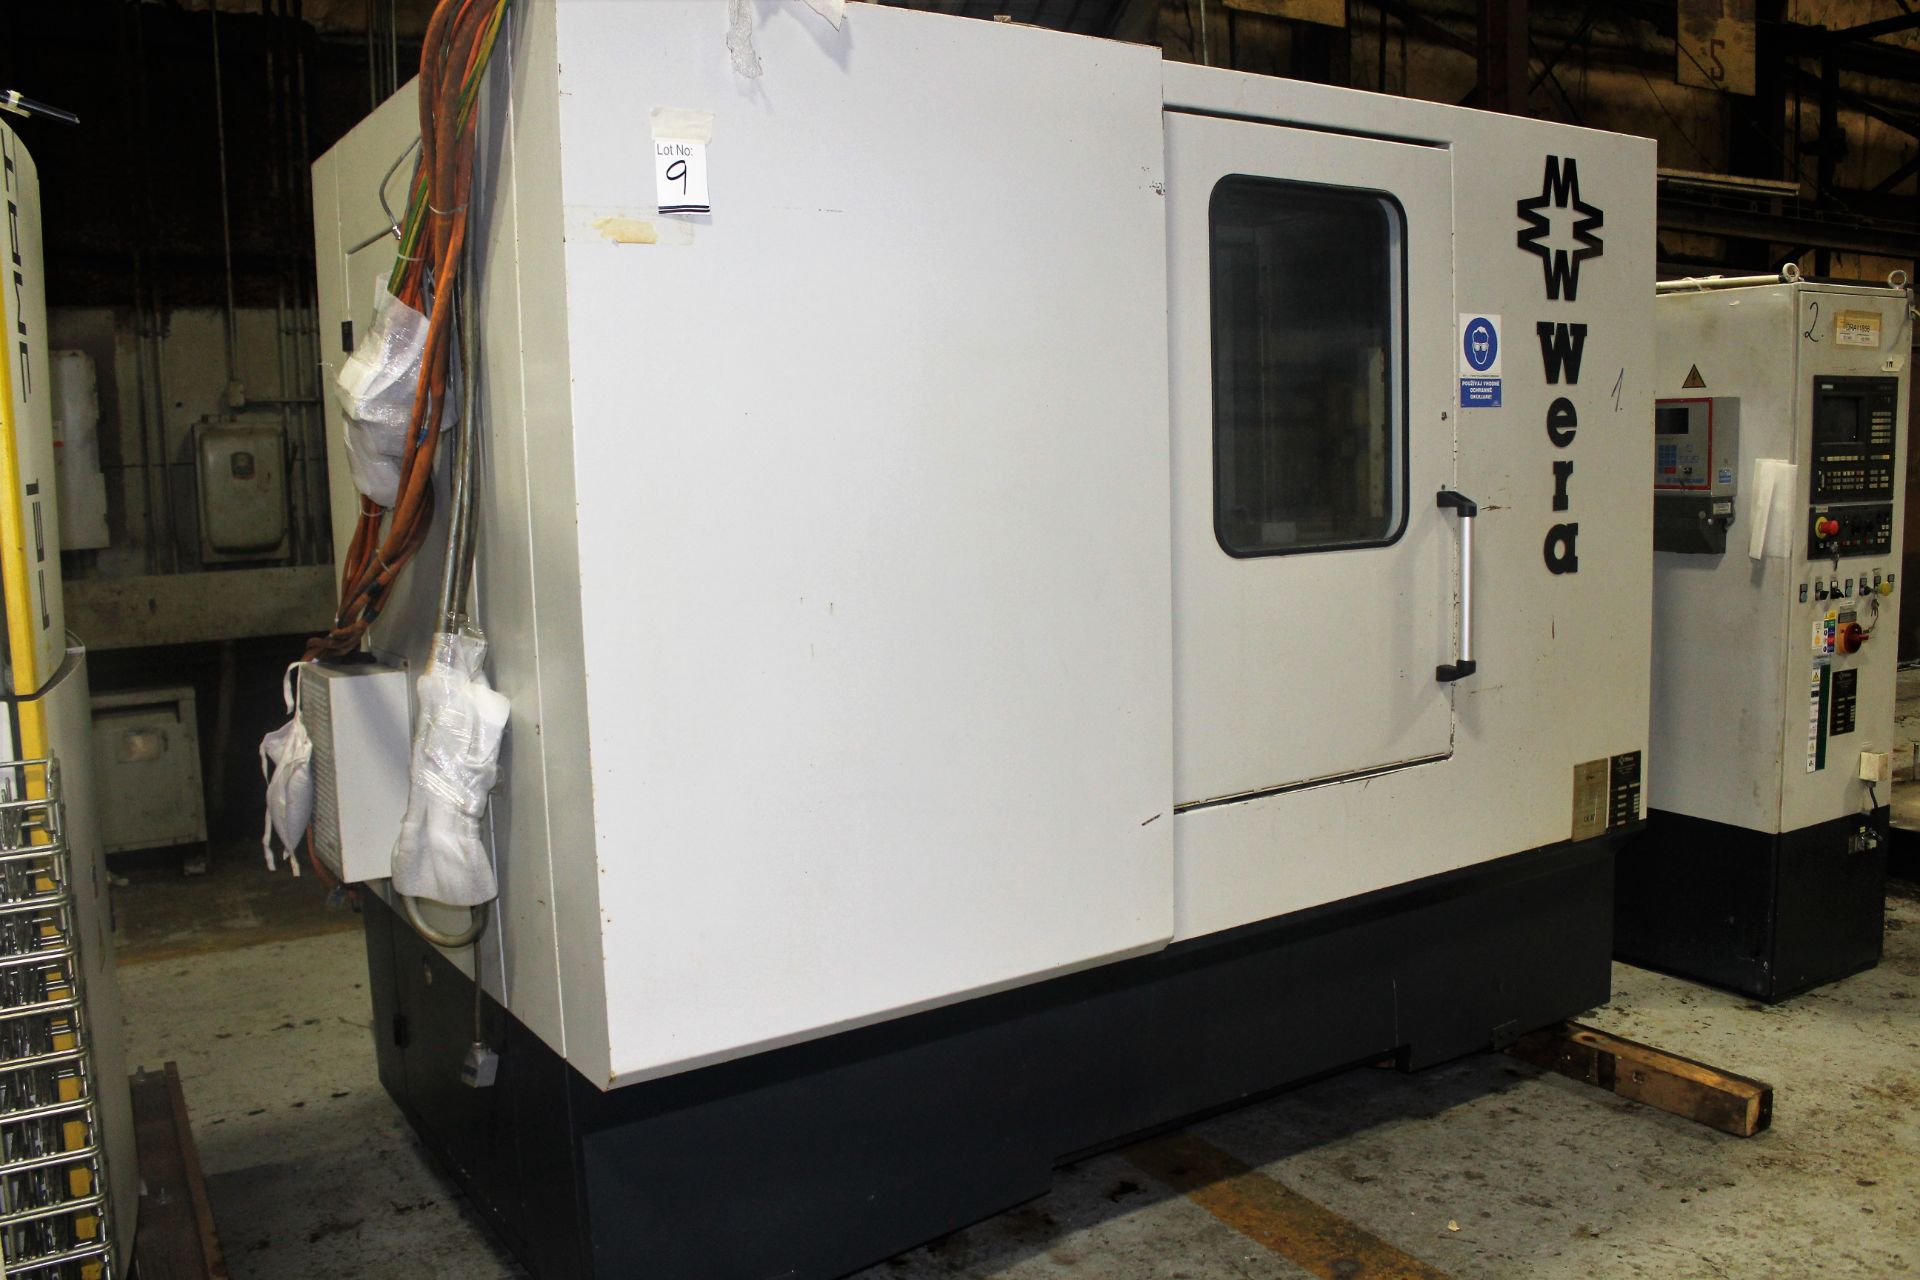 WERA MODEL RM-120 CNC GEAR PROFILATOR WITH FELSOMAT 9-PALLET PART STACKER, S/N 40-889-97 - Image 13 of 46